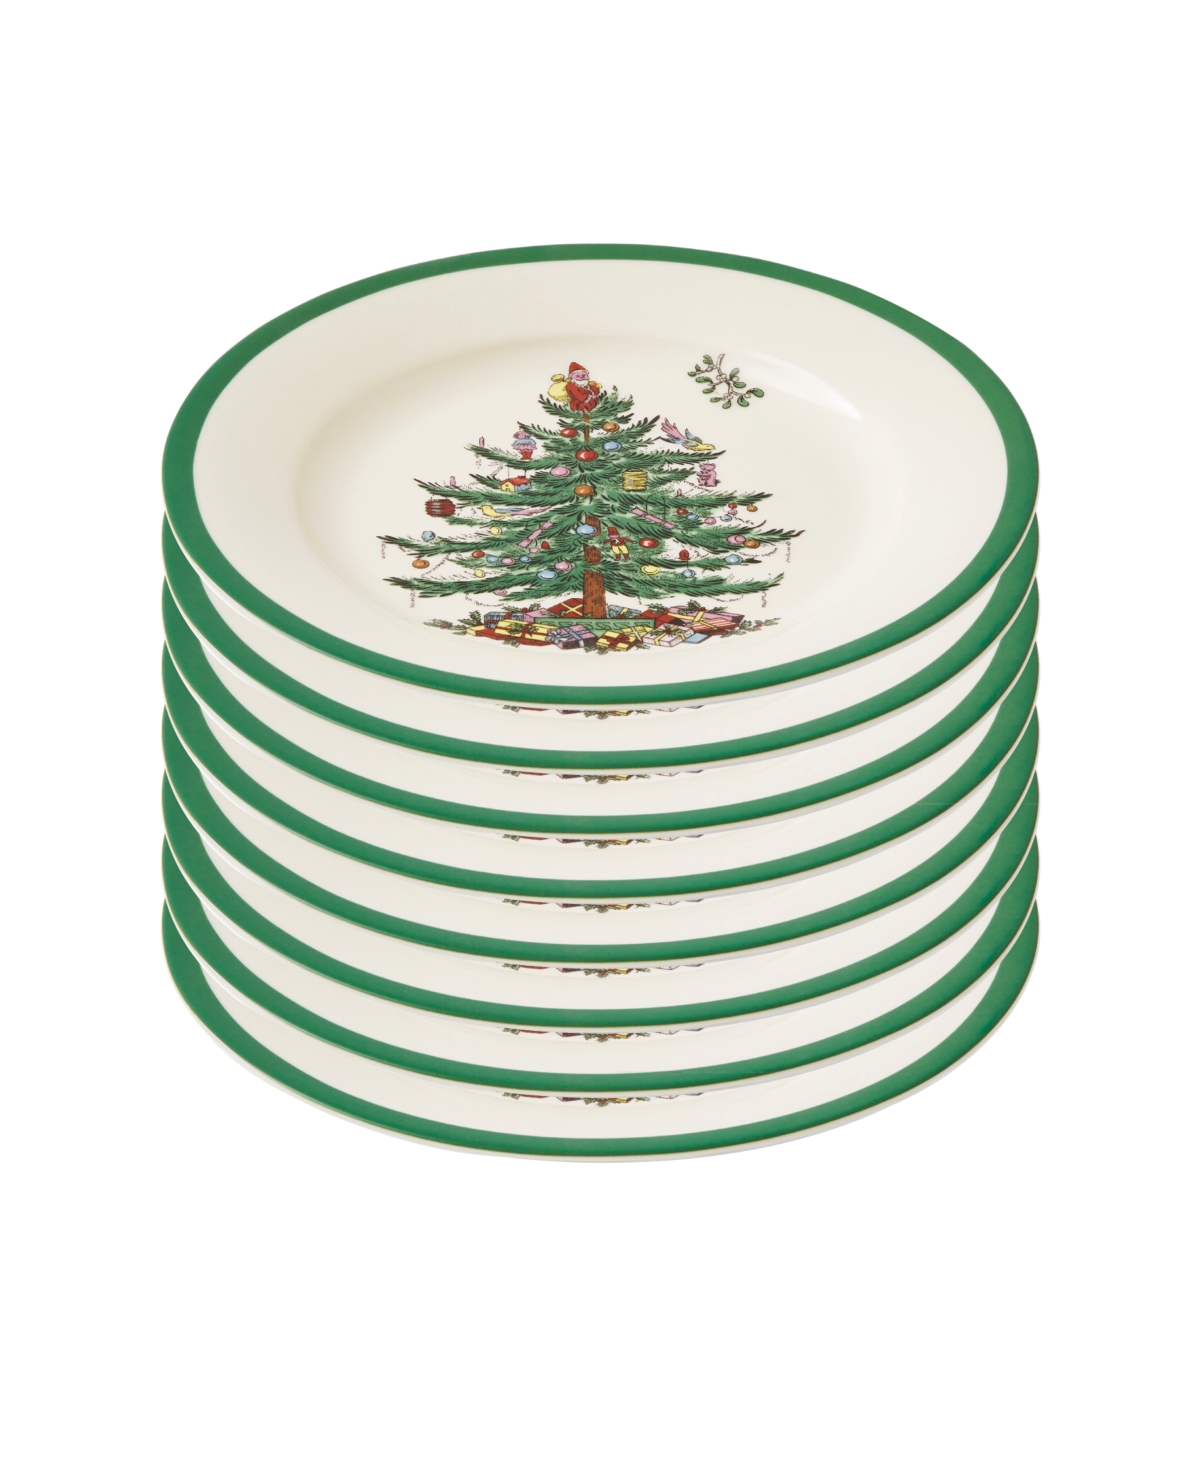 Spode Christmas Tree Salad Plate Set Of 8 In Green